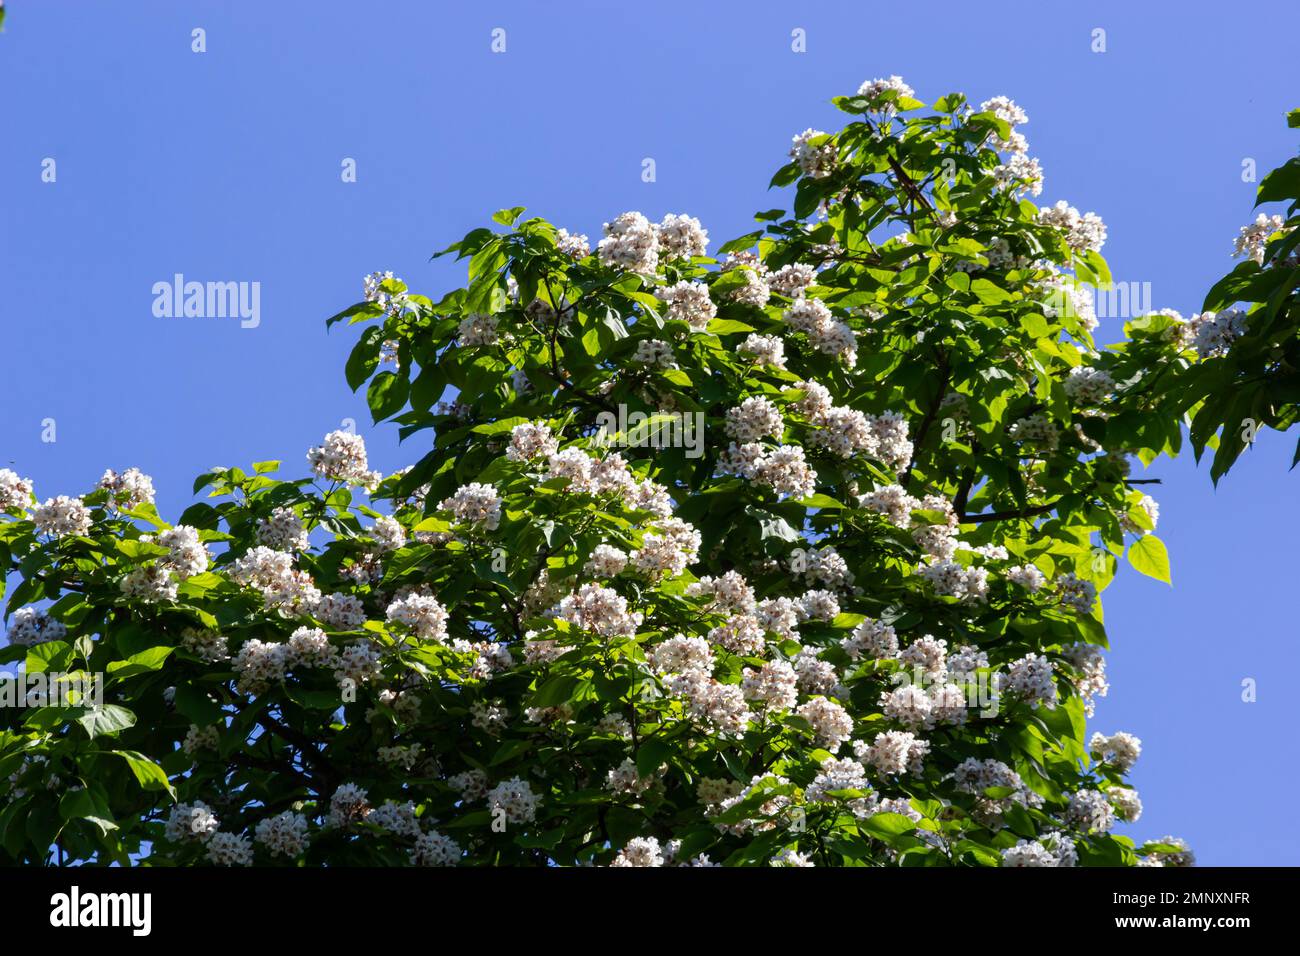 Catalpa tree is a decorative tree used in landscaping due to its showy, fragrant flowers and beautiful leave. Stock Photo